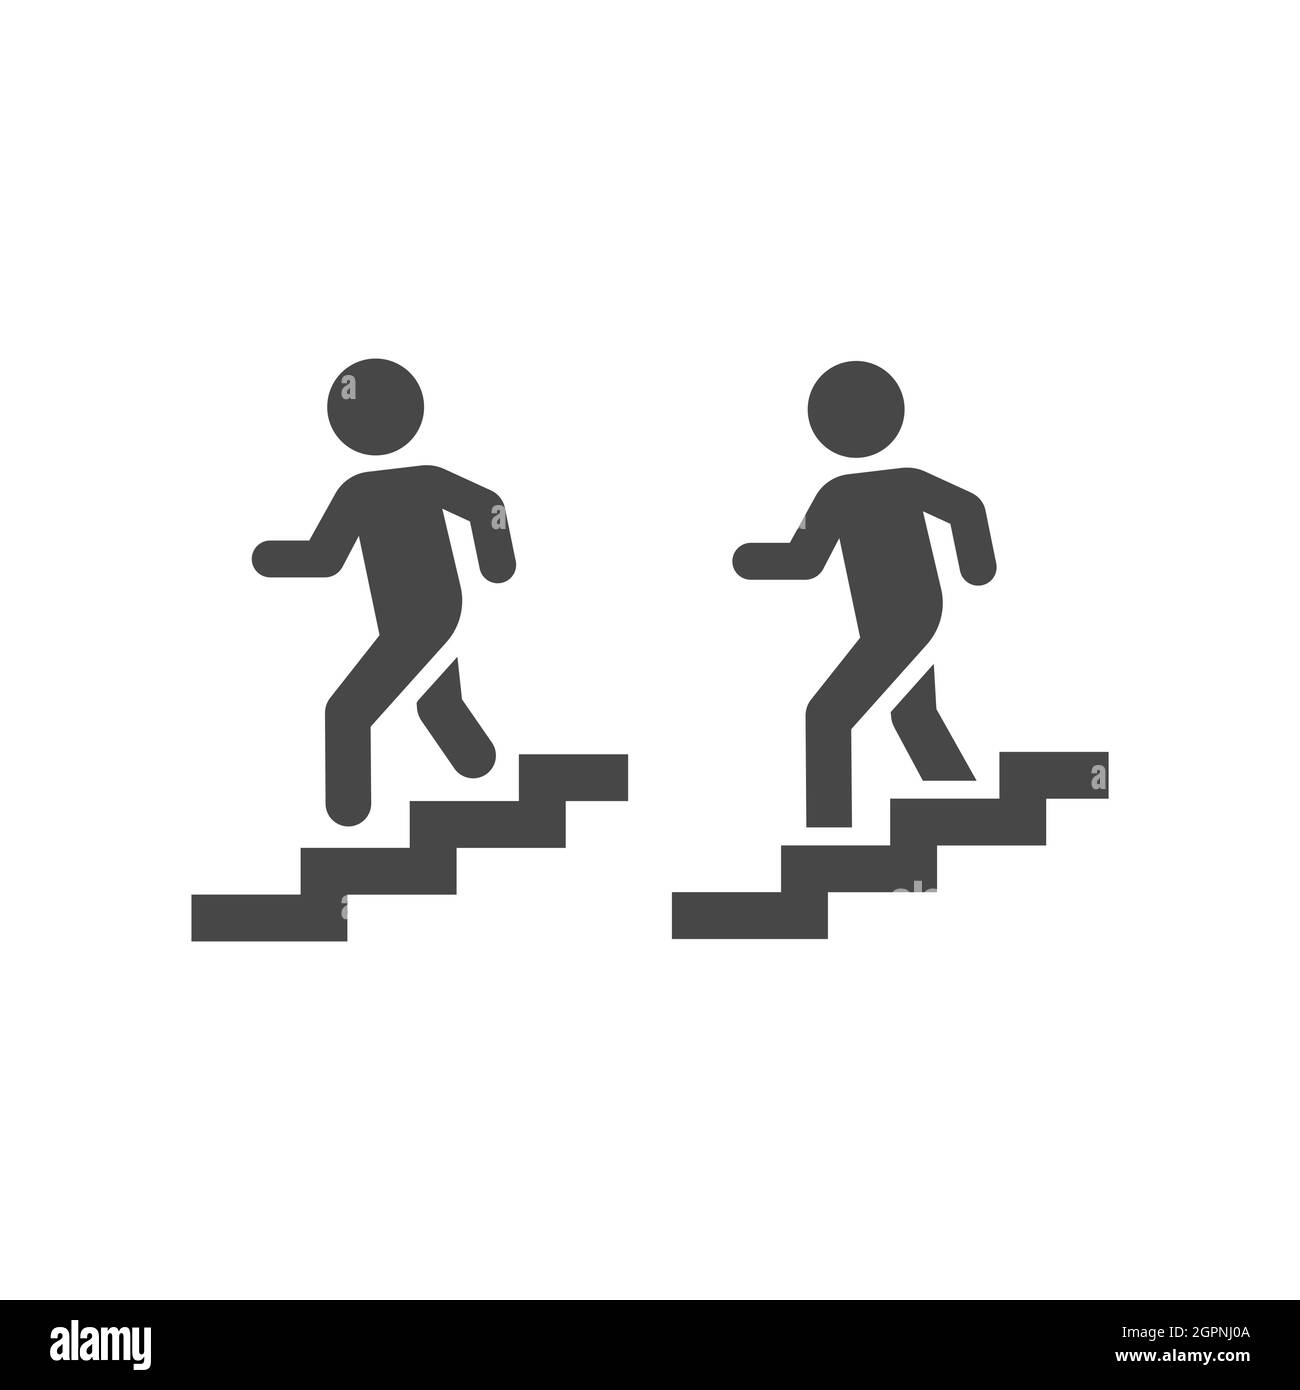 Man going down stairs vector icon Stock Vector